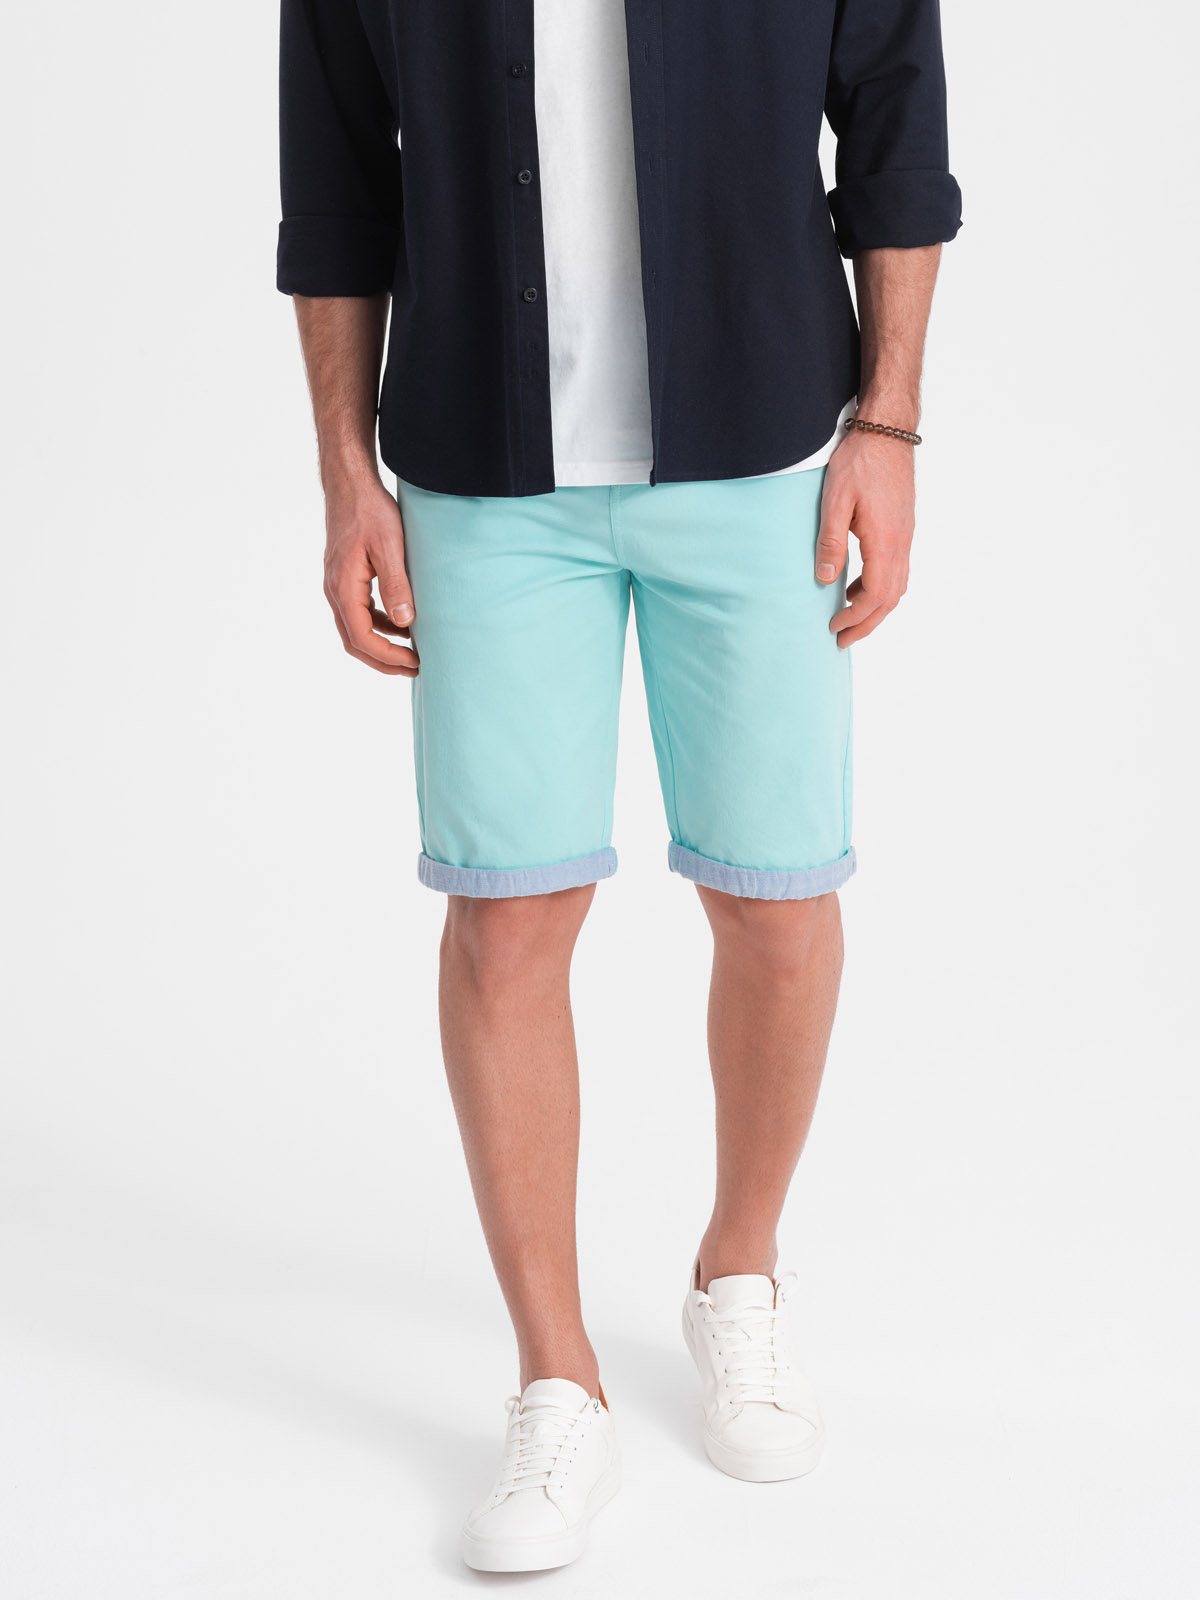 Ombre Men's chinos shorts with denim trim